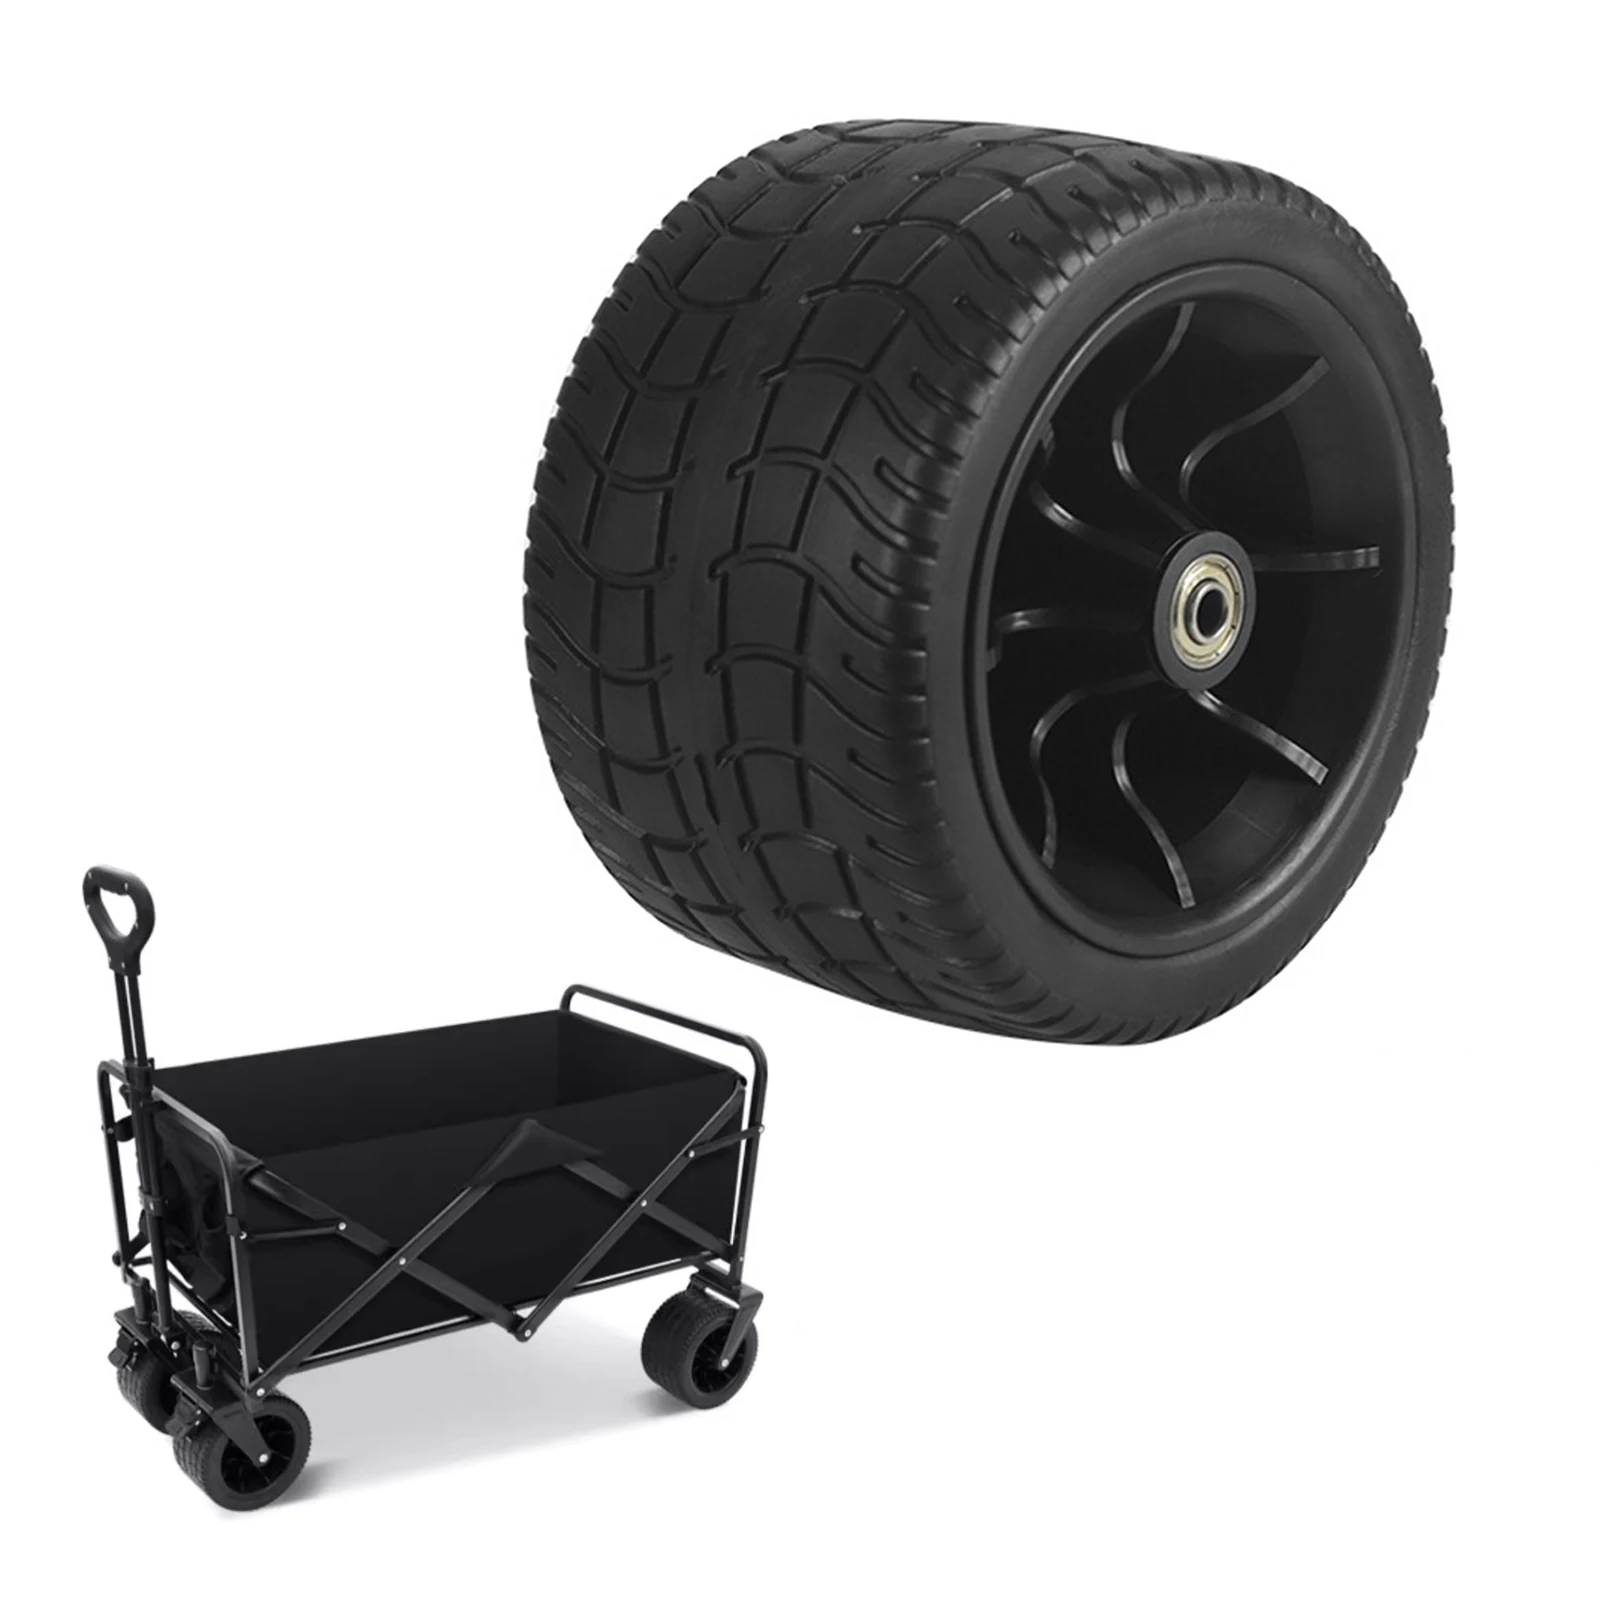 

Premium 6in PU Replacement Wheel Tire with Double Bearings Ideal for All Terrain Use on For Folding Wagon Cart